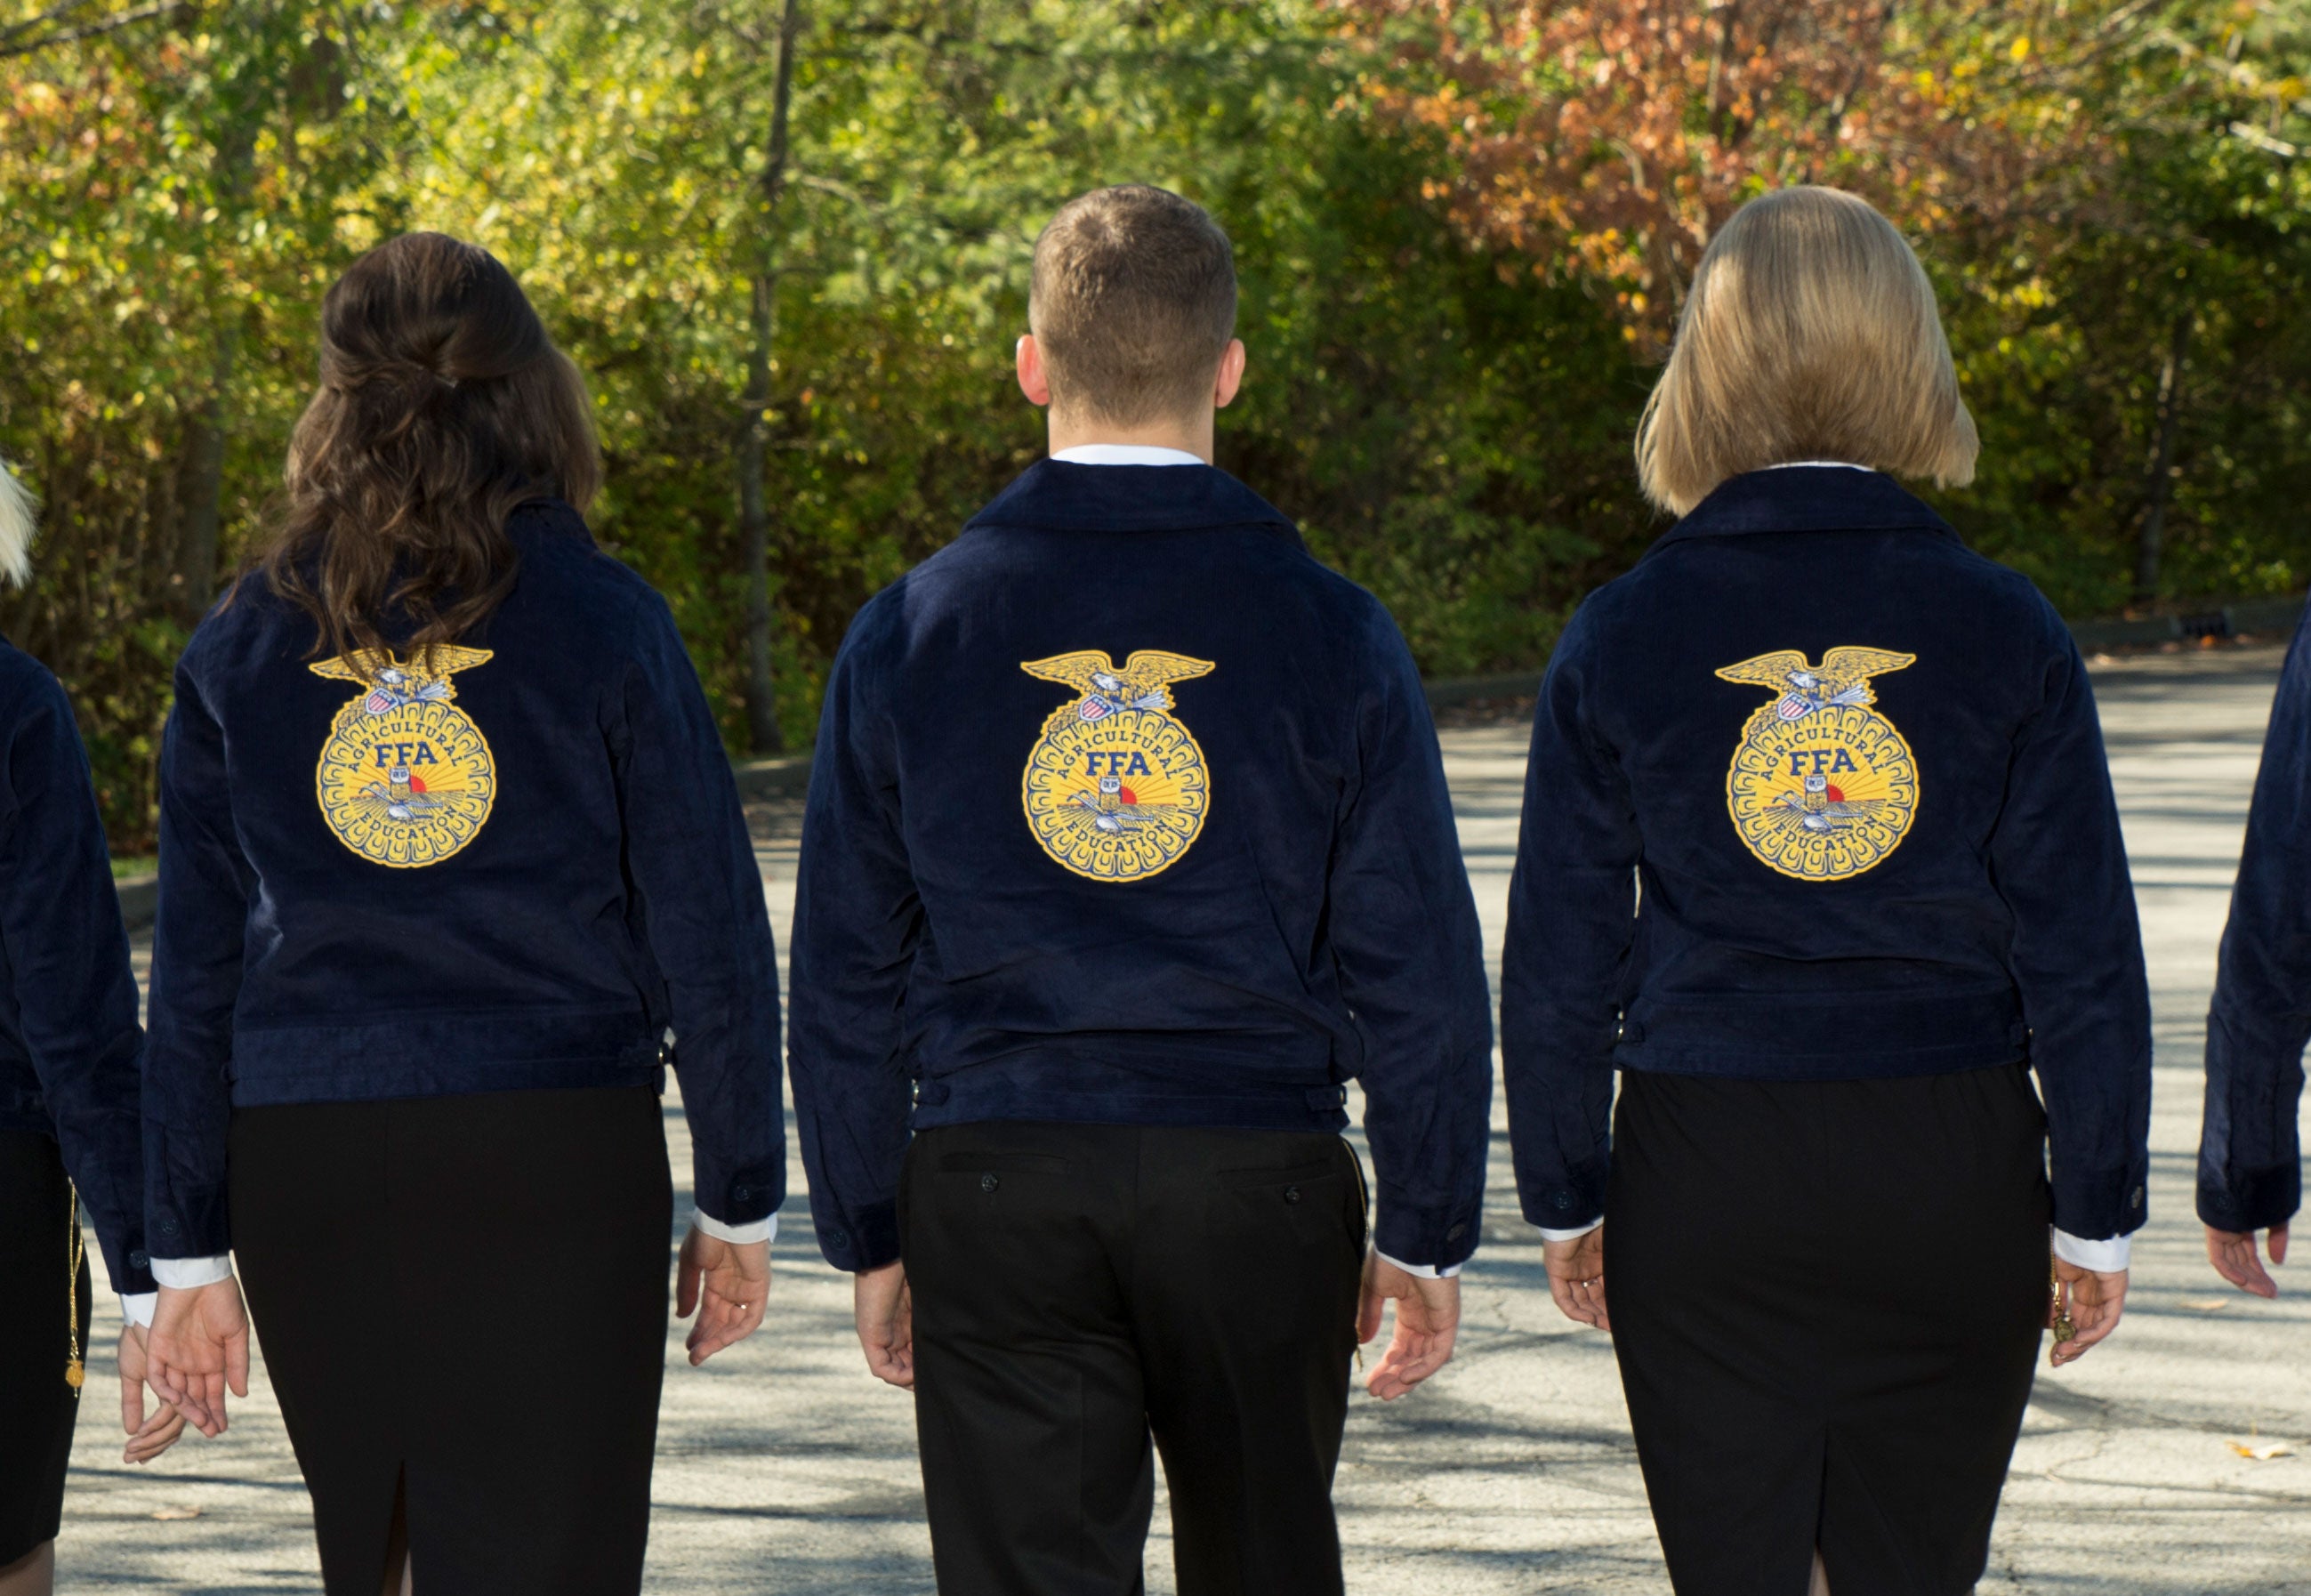 Nurture mental wellness among FFA members & other ag youth | AGDAILY